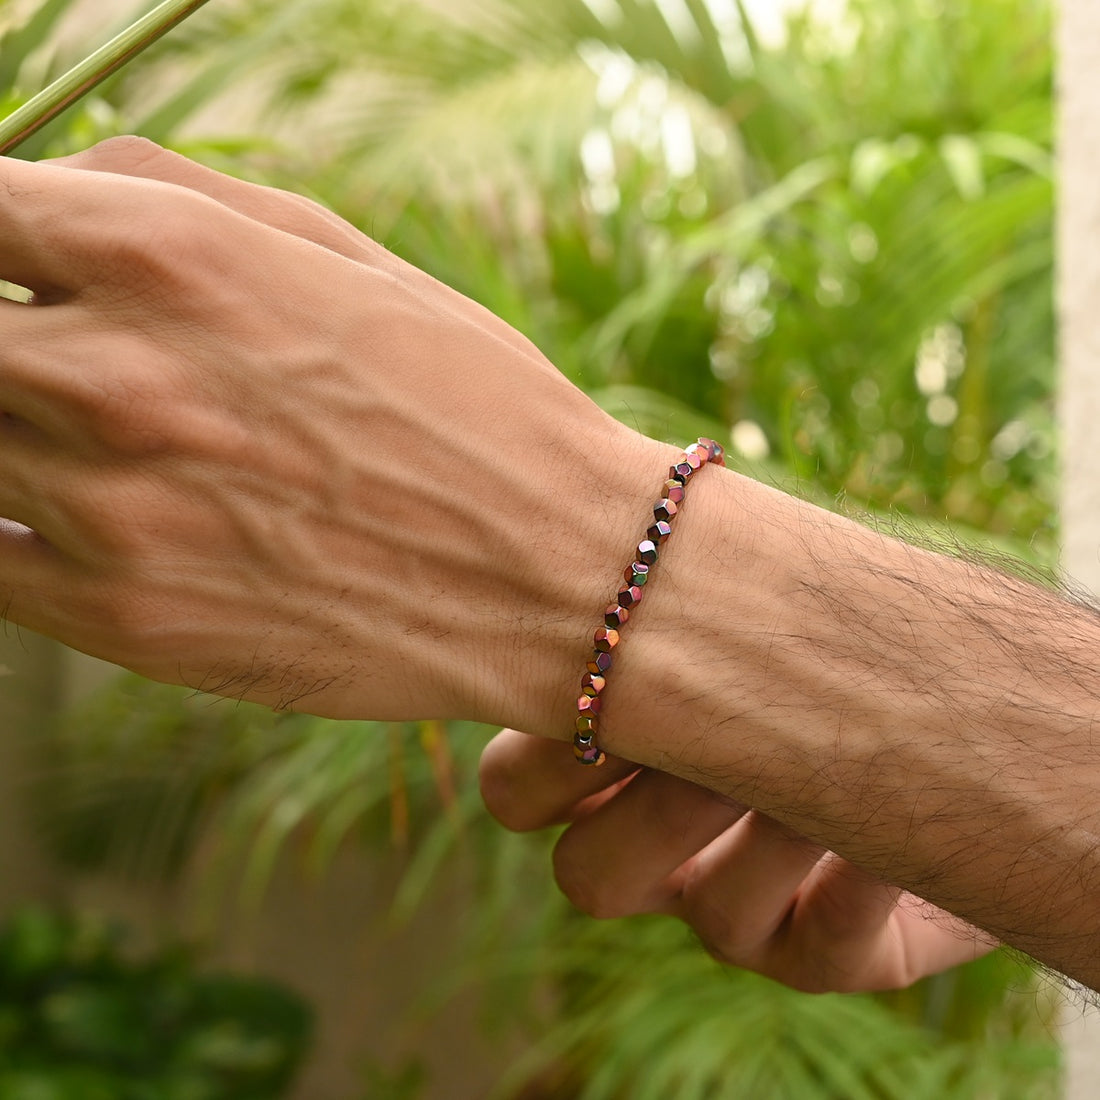 Mystic Pink Hematite Star Cut Stretch Bracelet: Smooth 4mm star cut beads in delicate pink hue